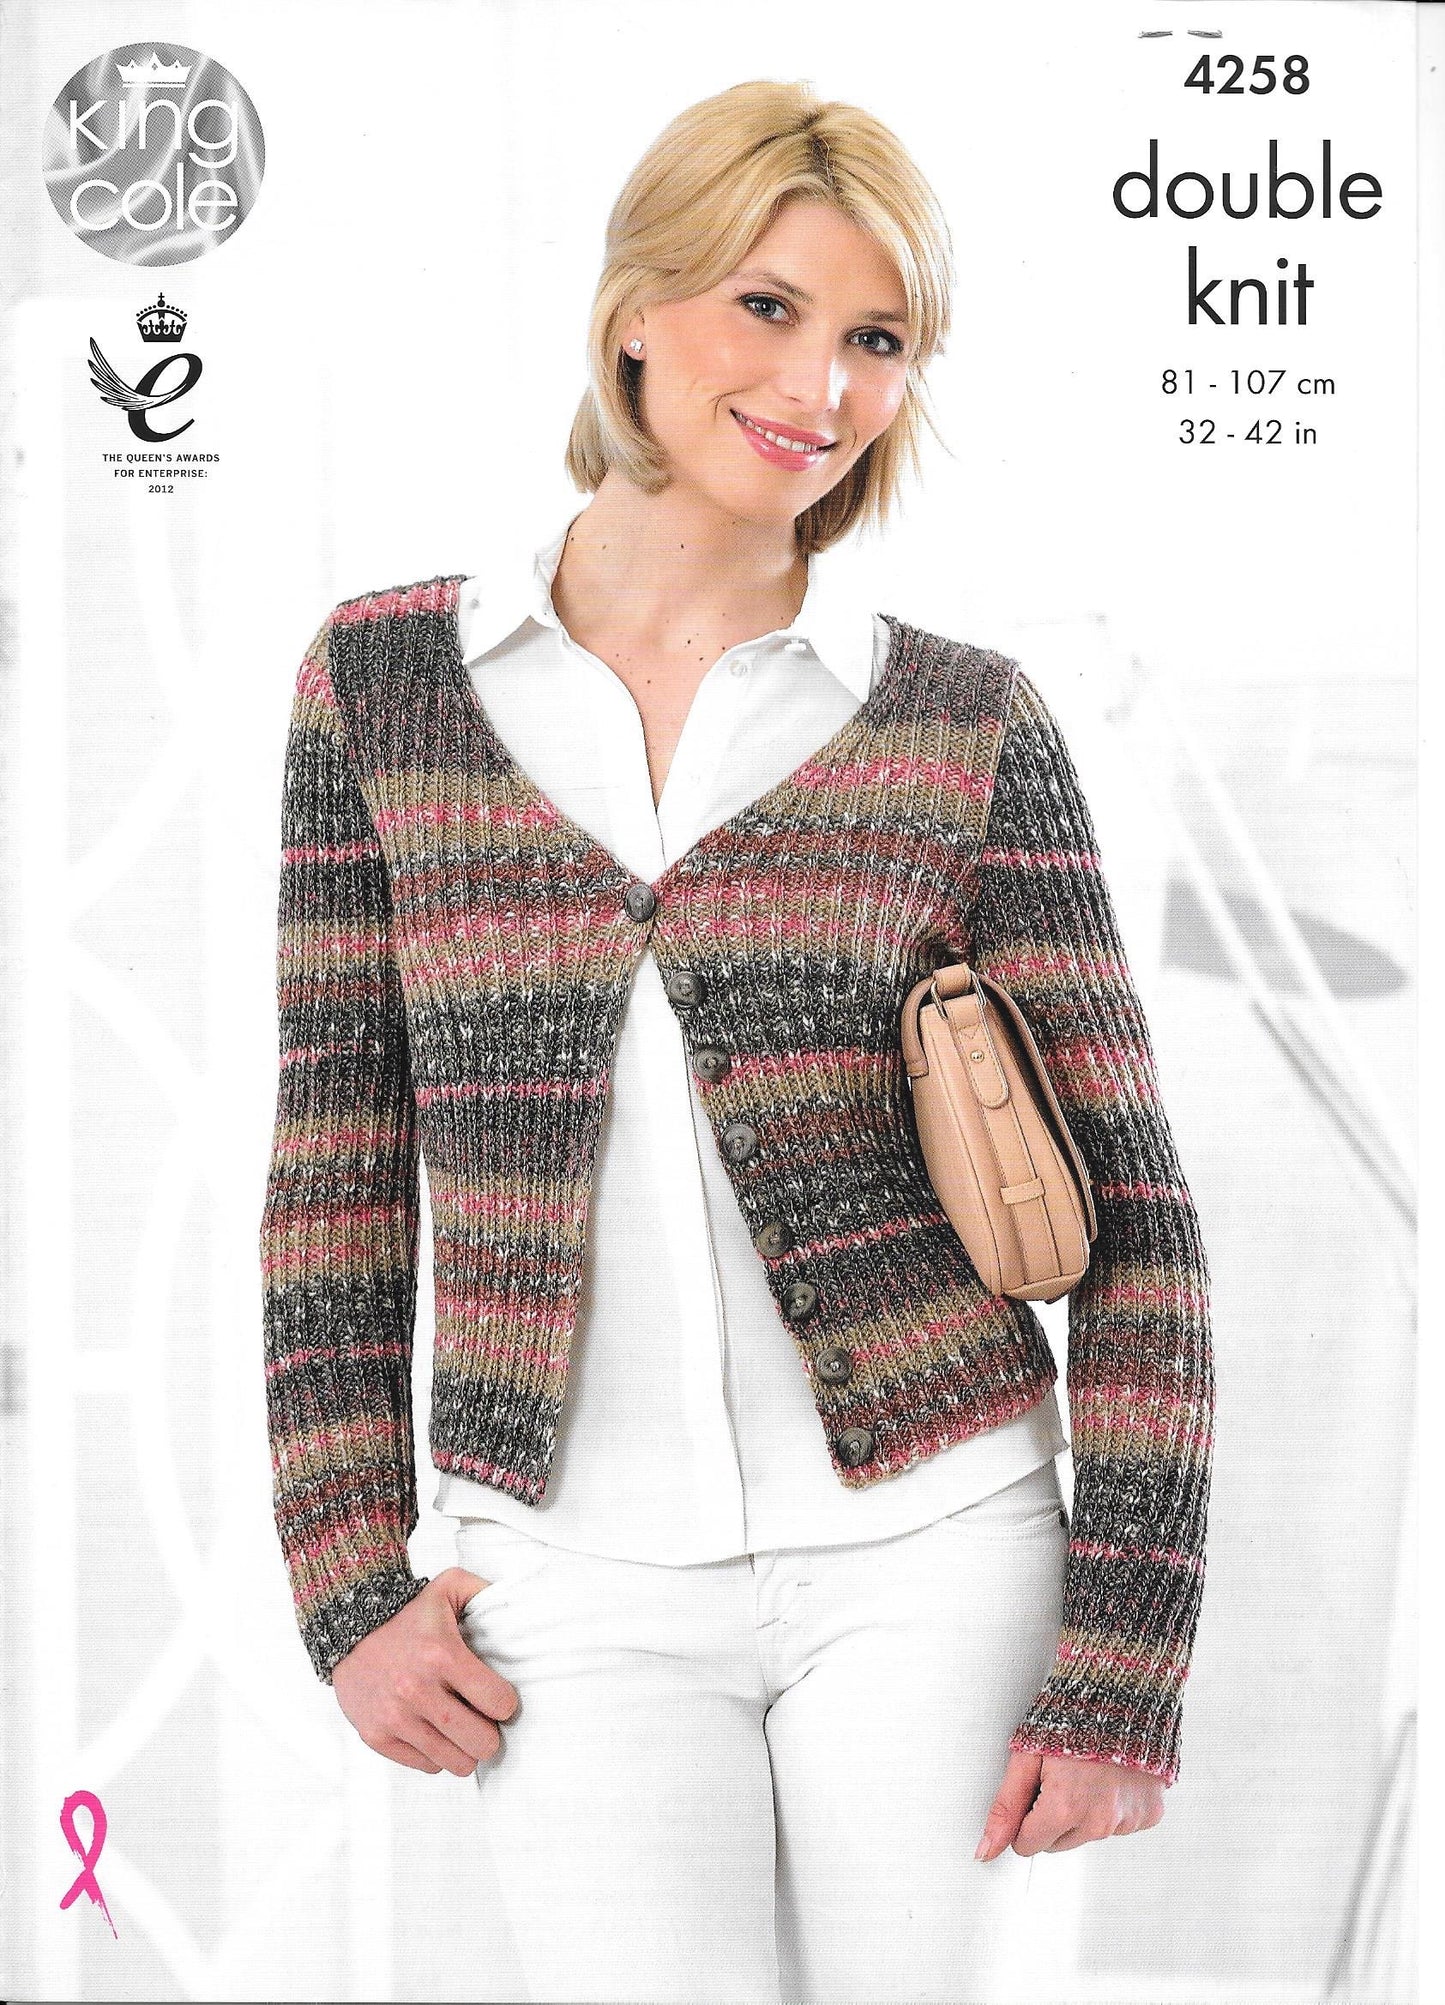 4258 King Cole Drifter double knit ladies cardigan and sweater knitting pattern